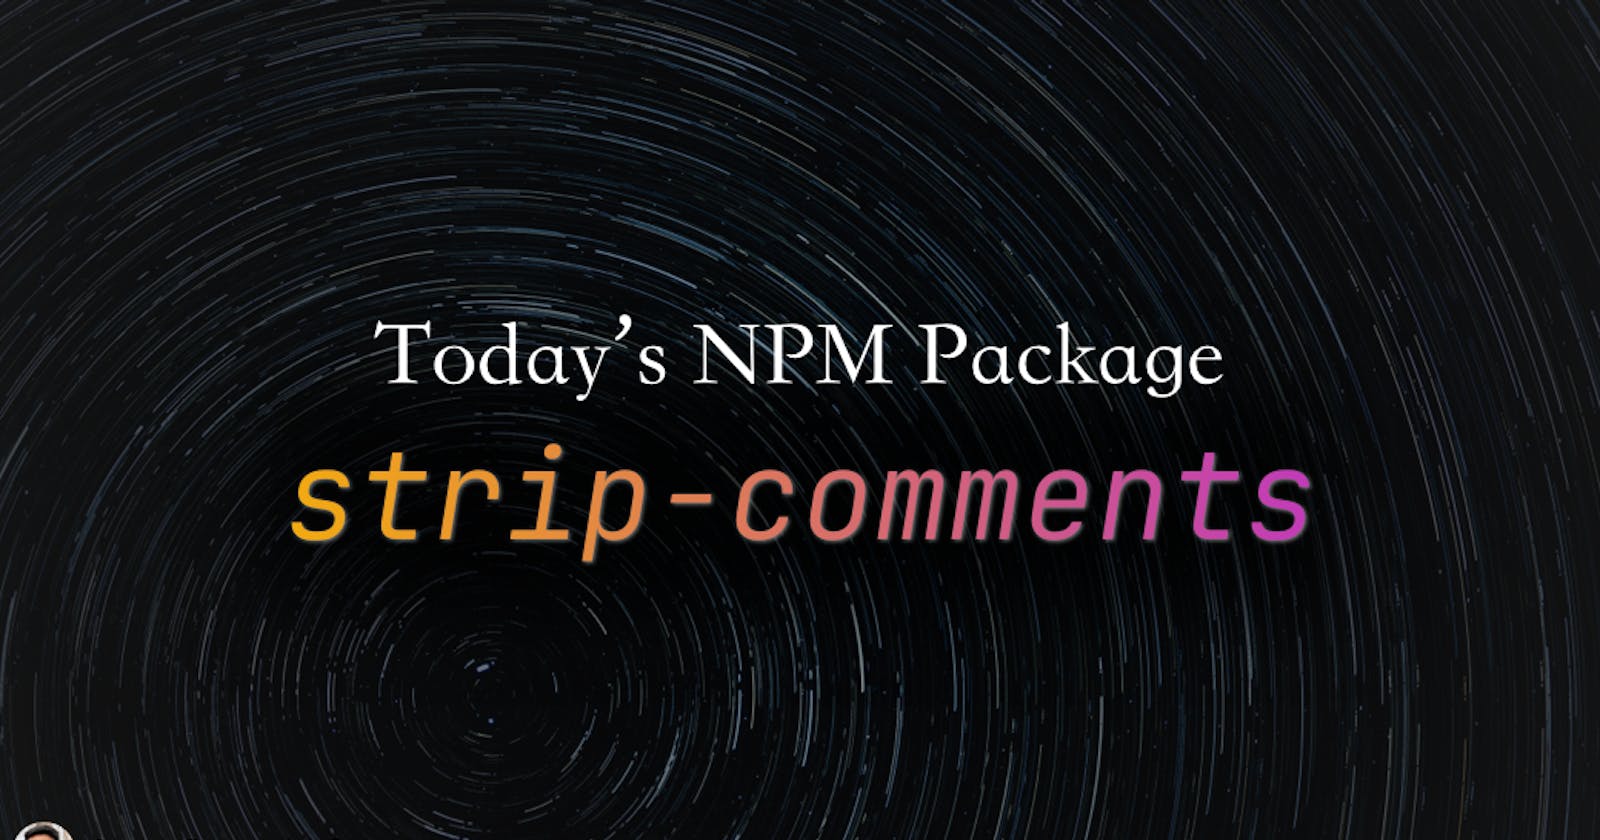 Today's npm package: strip-comments